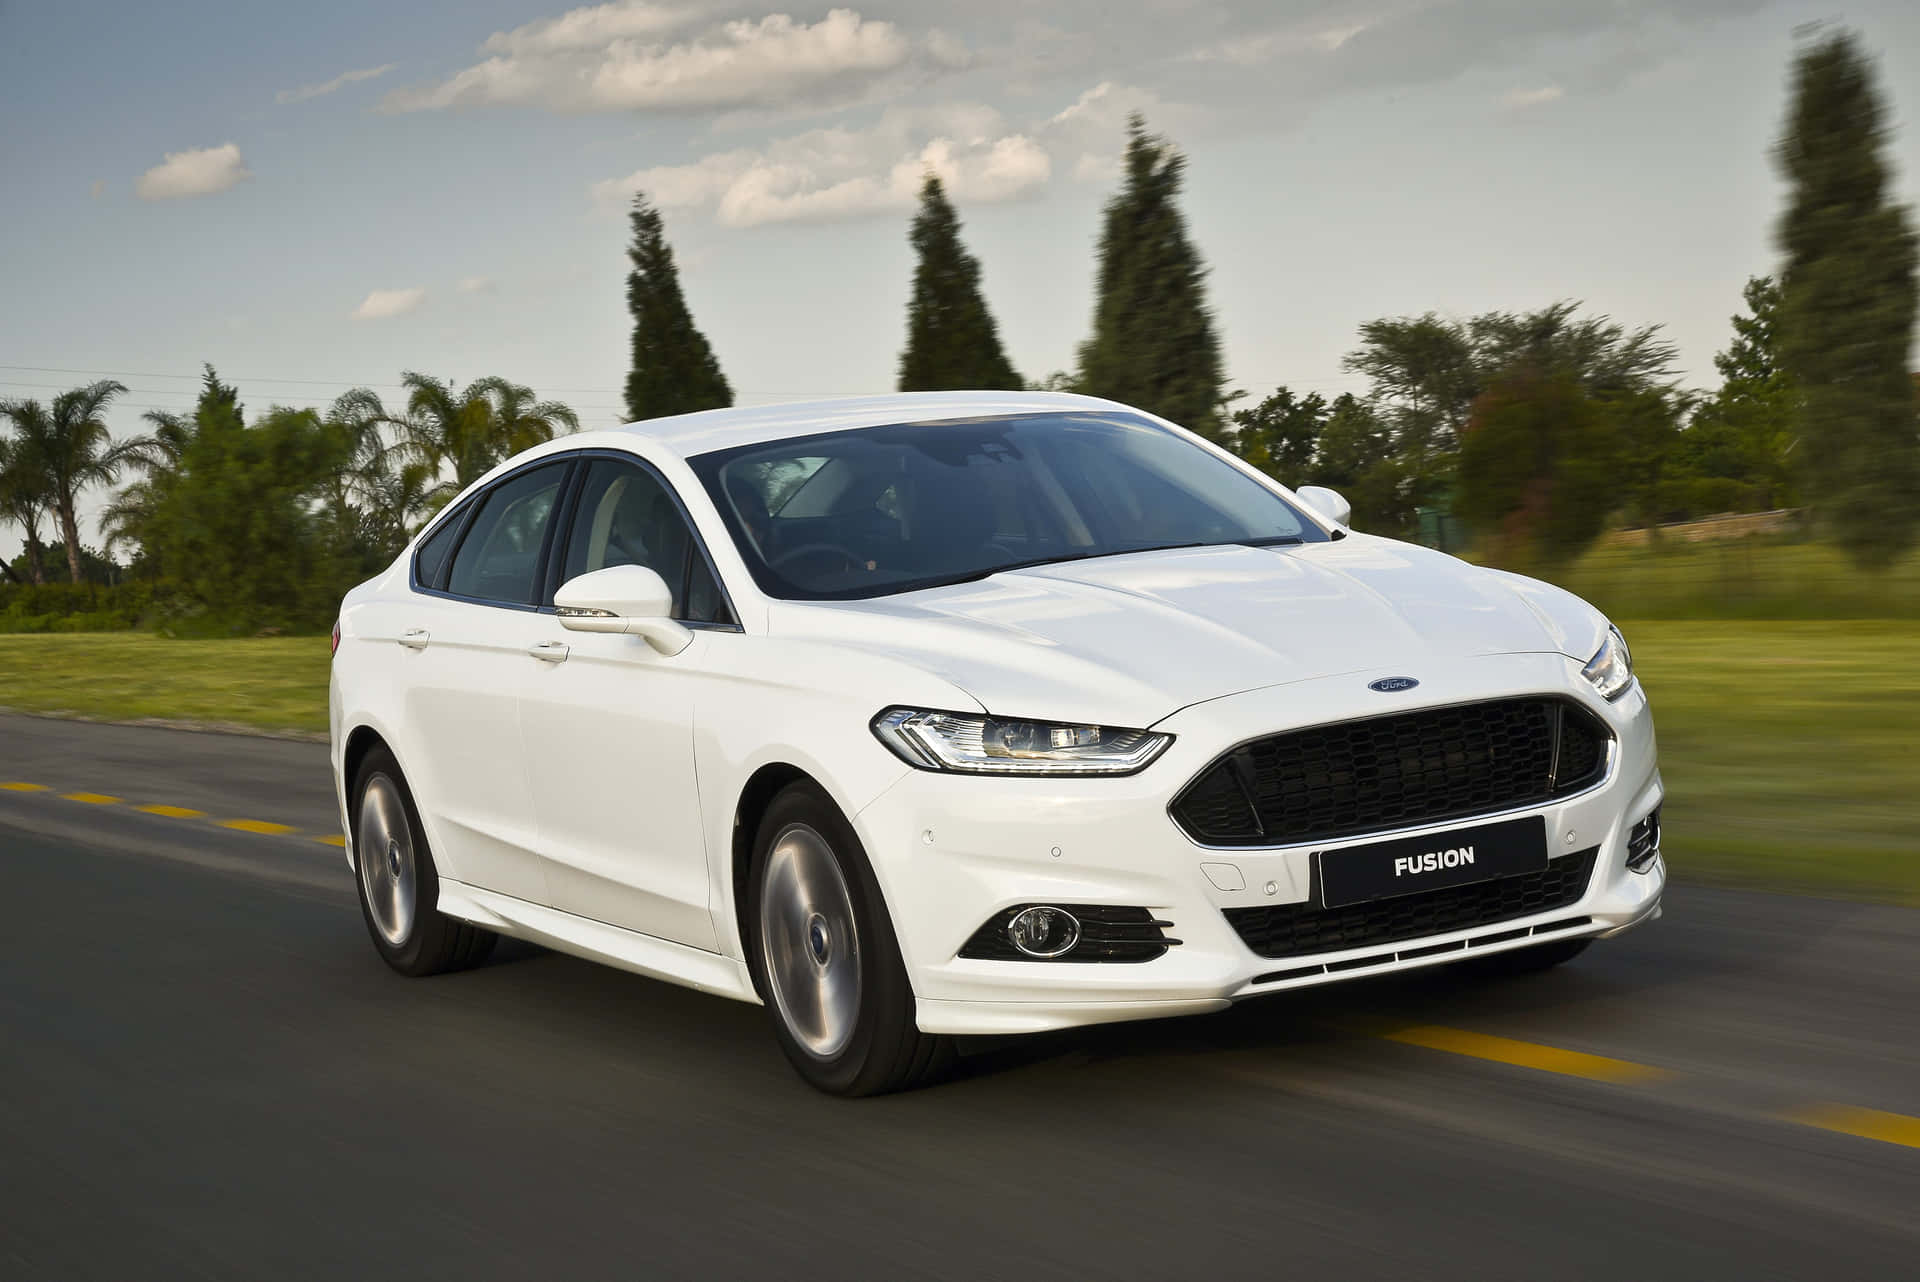 Sleek and Stylish Ford Fusion in Action Wallpaper